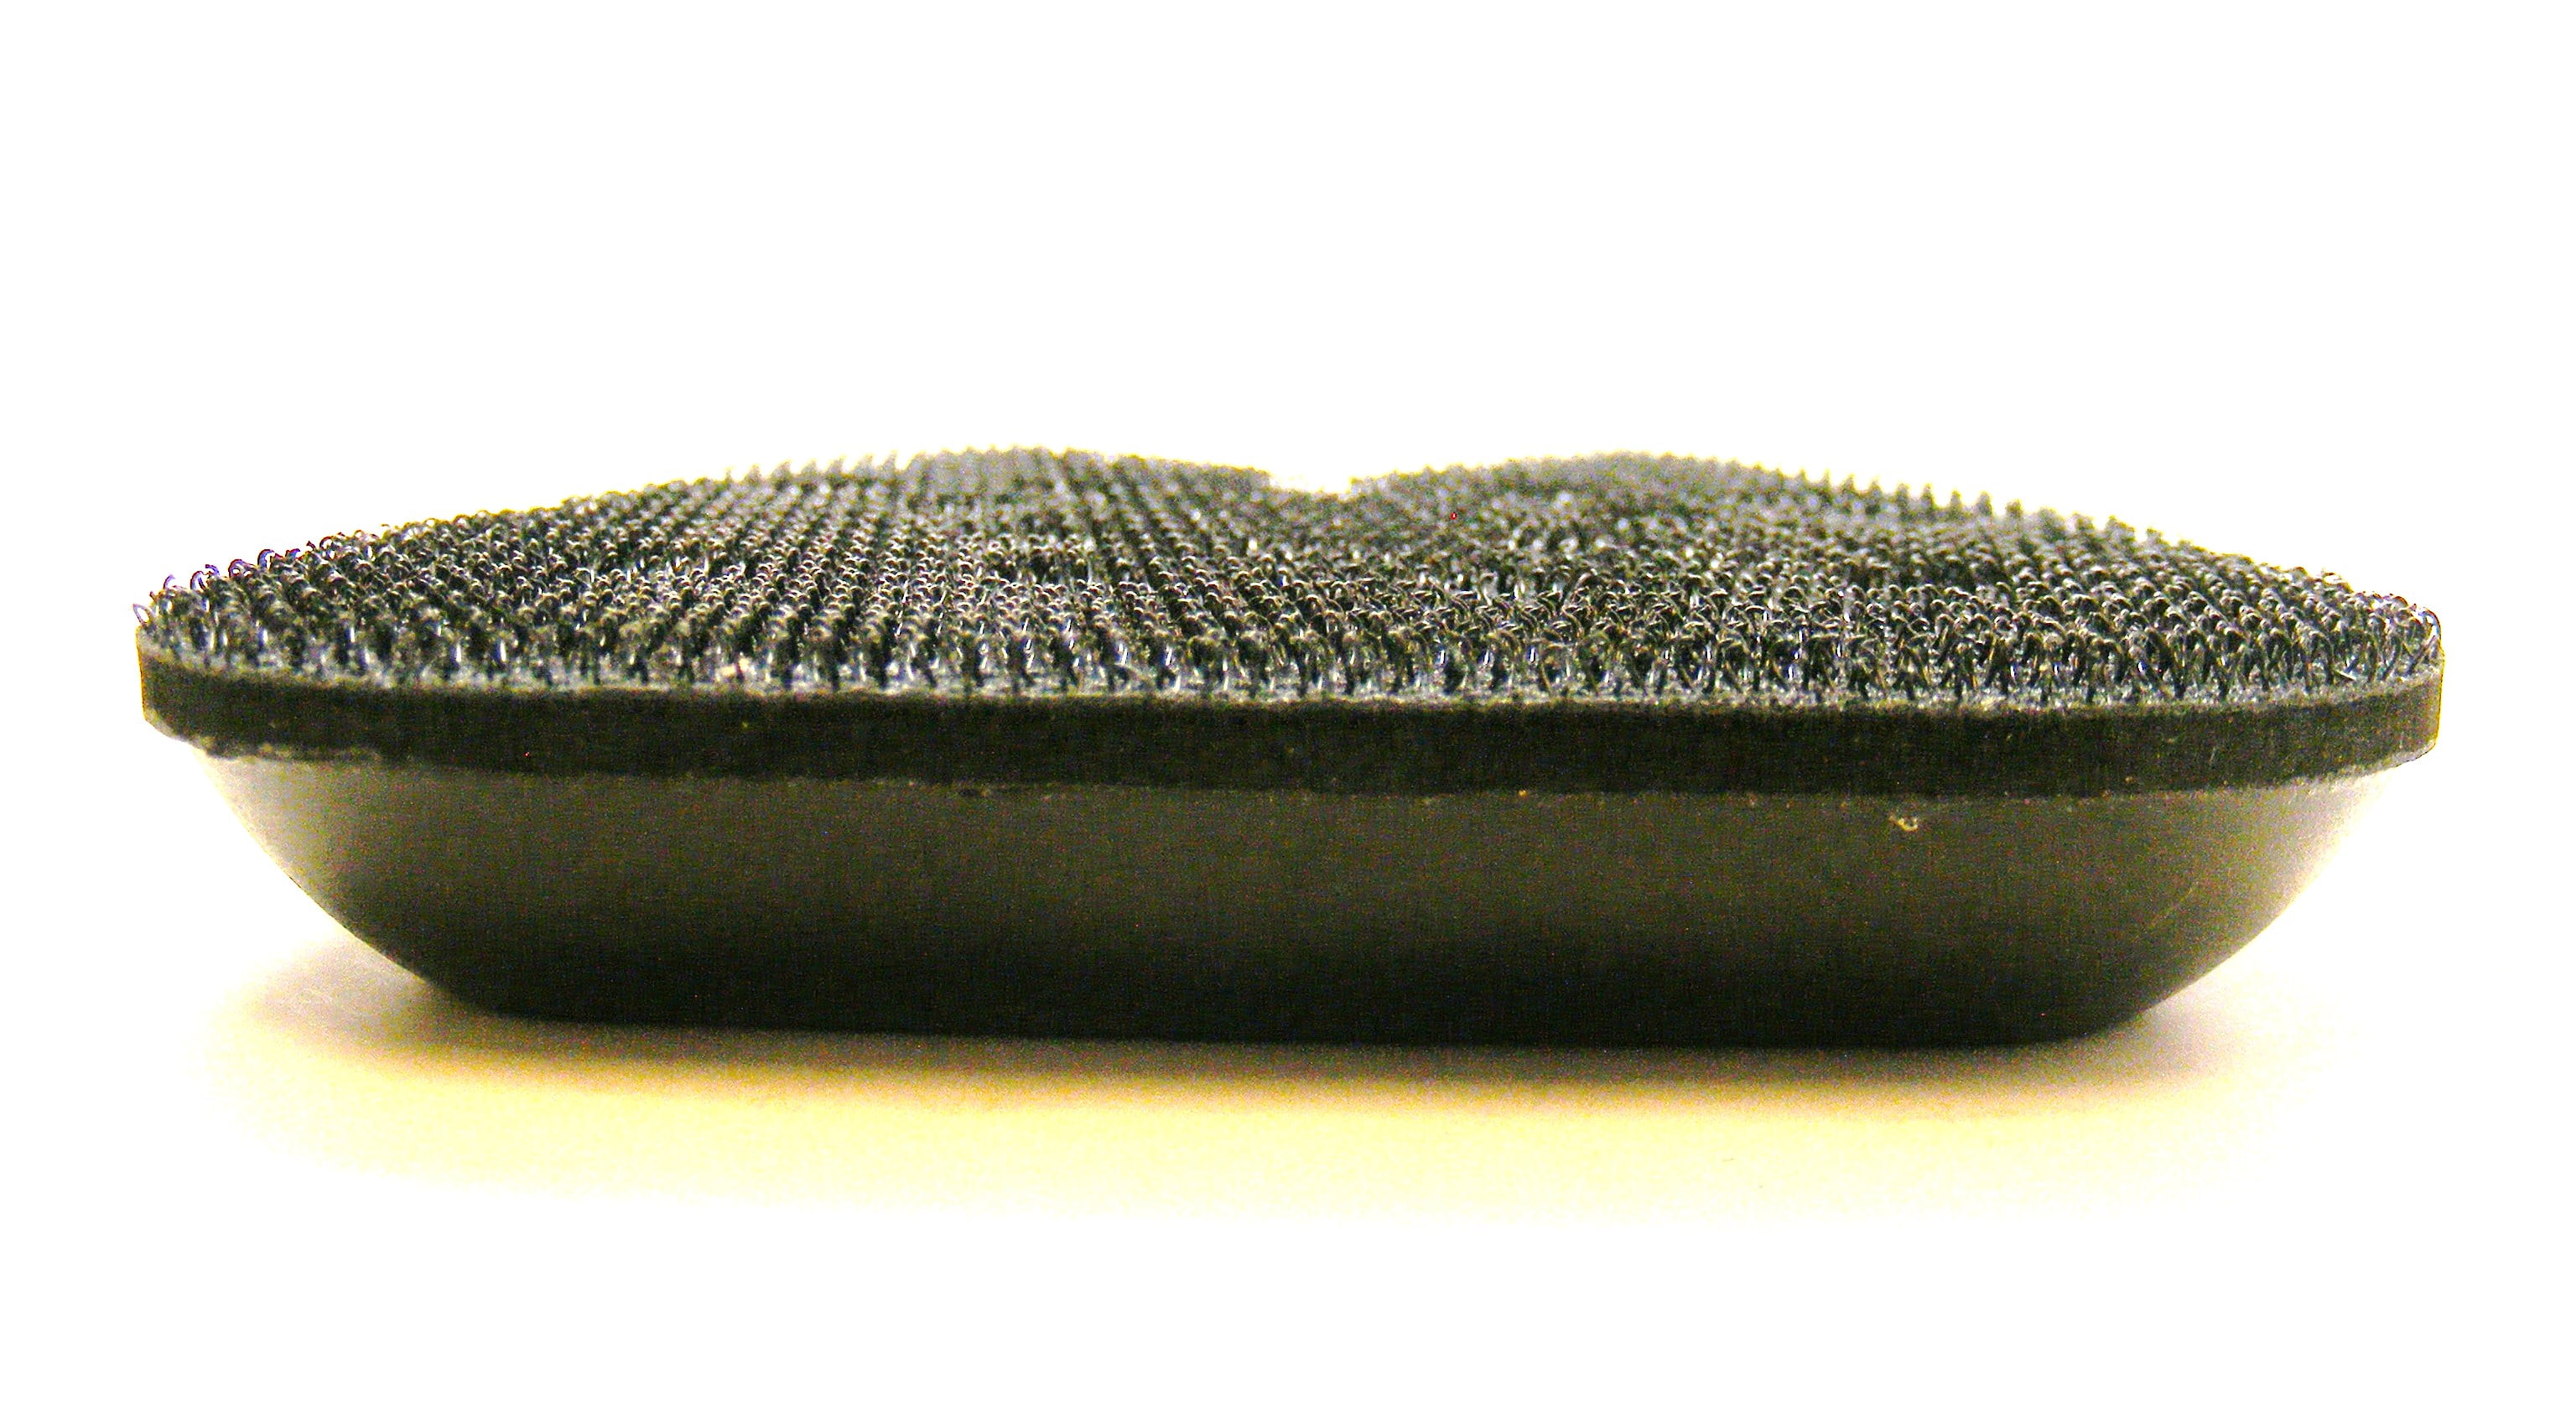 & Platen Mouse Replacement MS800B Sander Pad and 90532516 Black # Decker